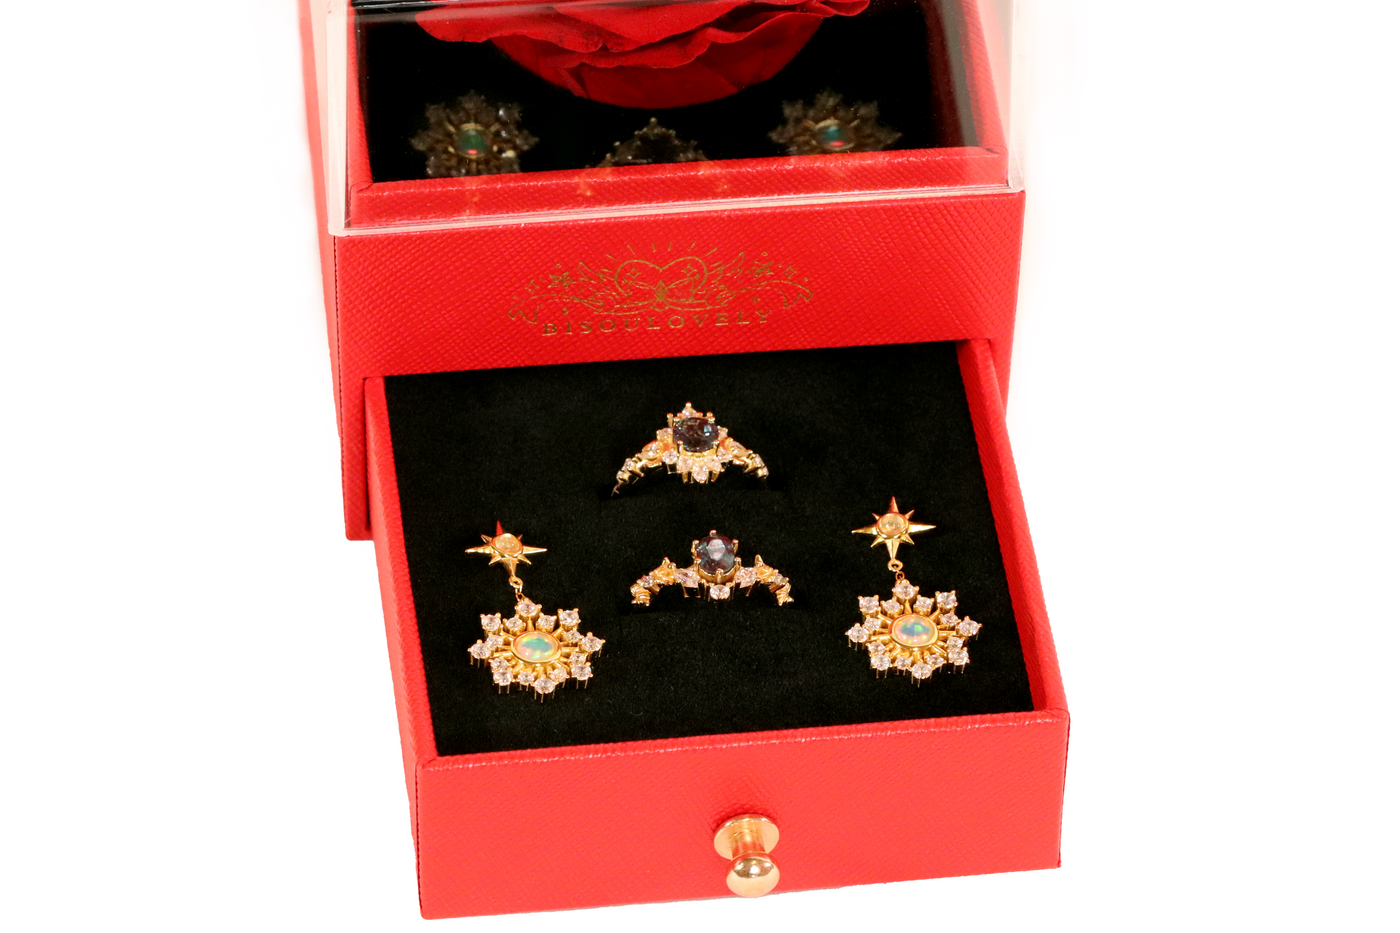 Red Rose Jewelry Box - Jewelry Boxes - 4